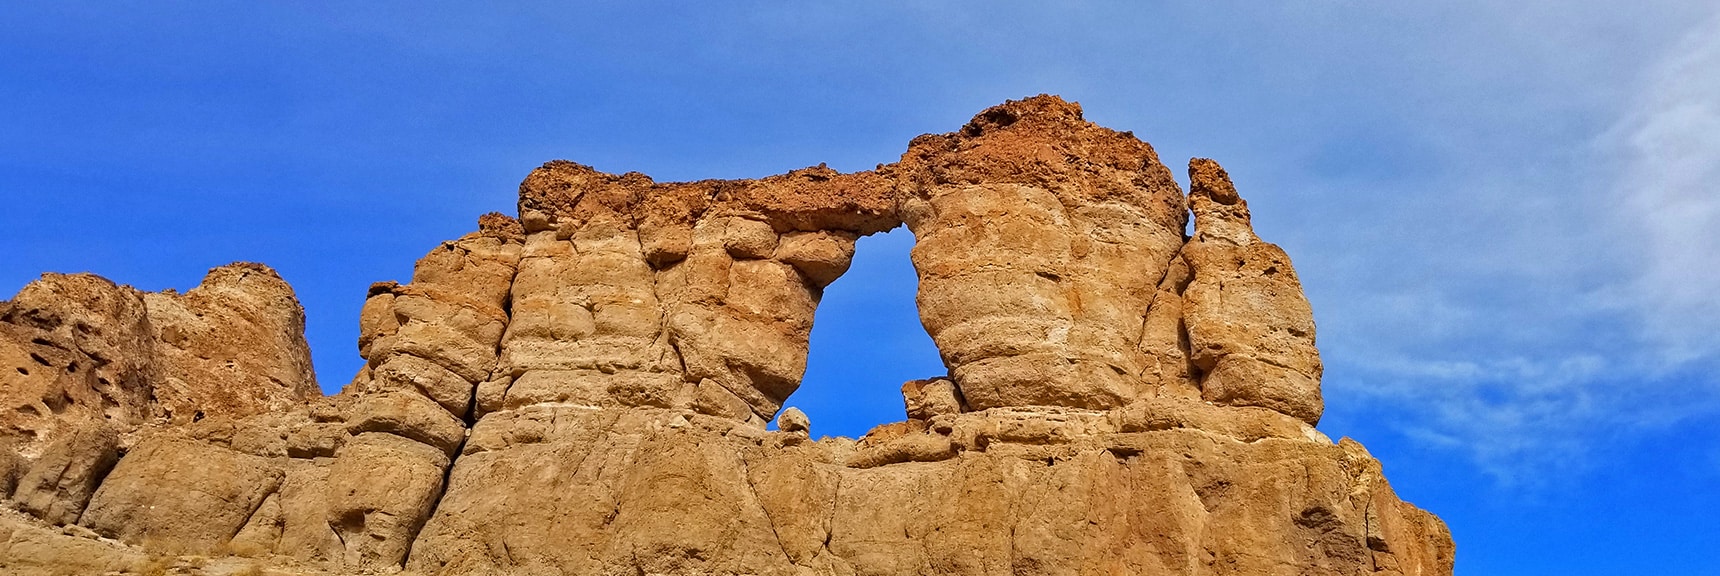 Liberty Bell Arch | Arizona Hot Spring | Liberty Bell Arch | Lake Mead National Recreation Area, Arizona